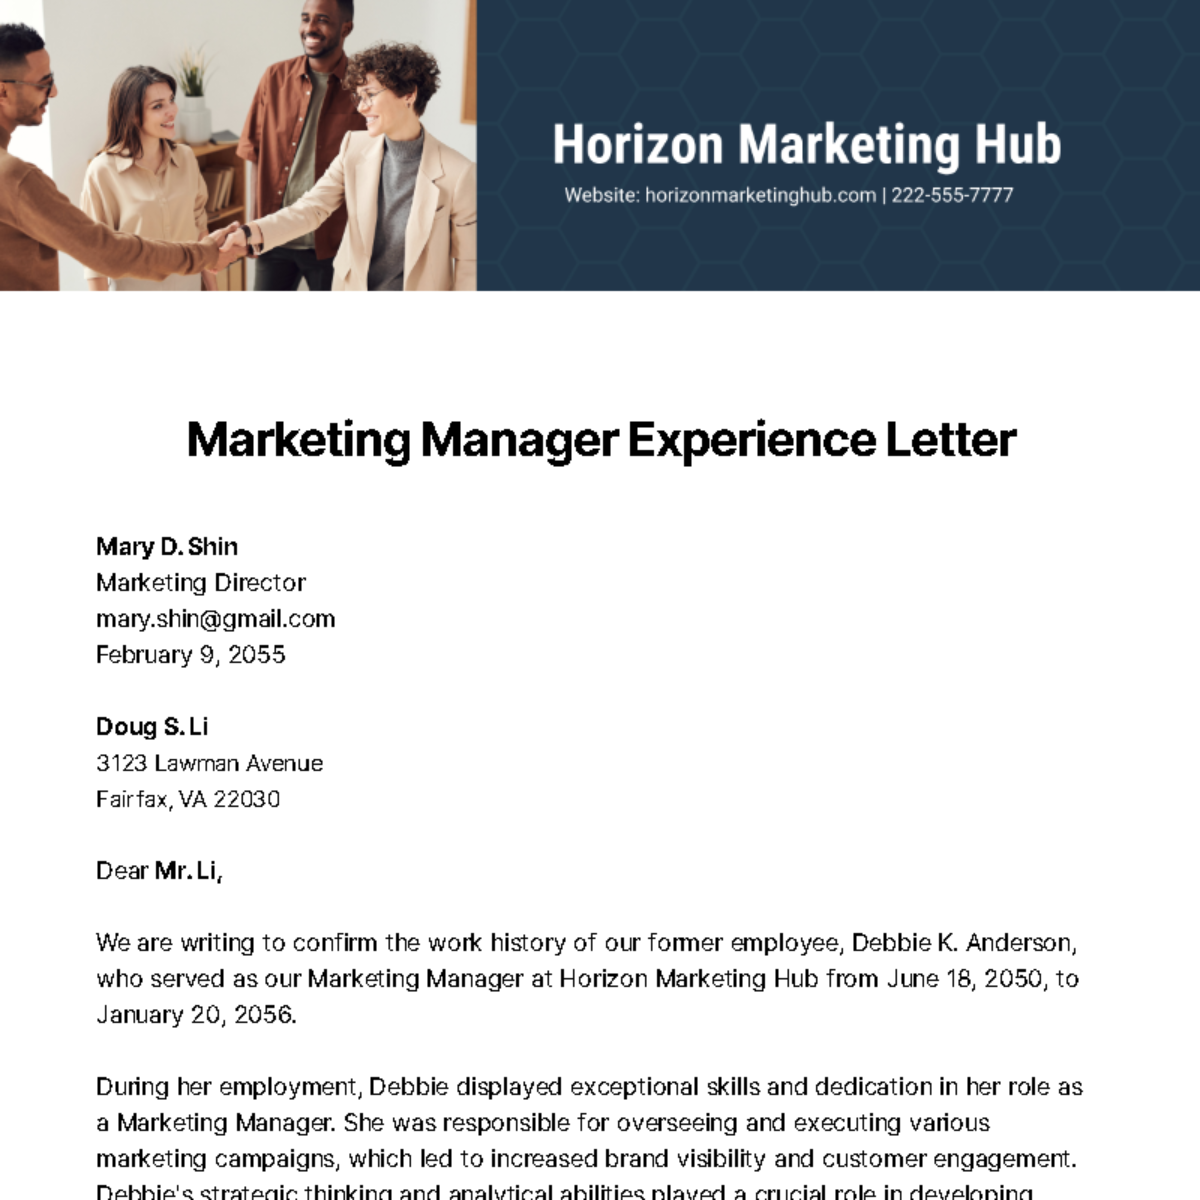 Marketing Manager Experience Letter   Template